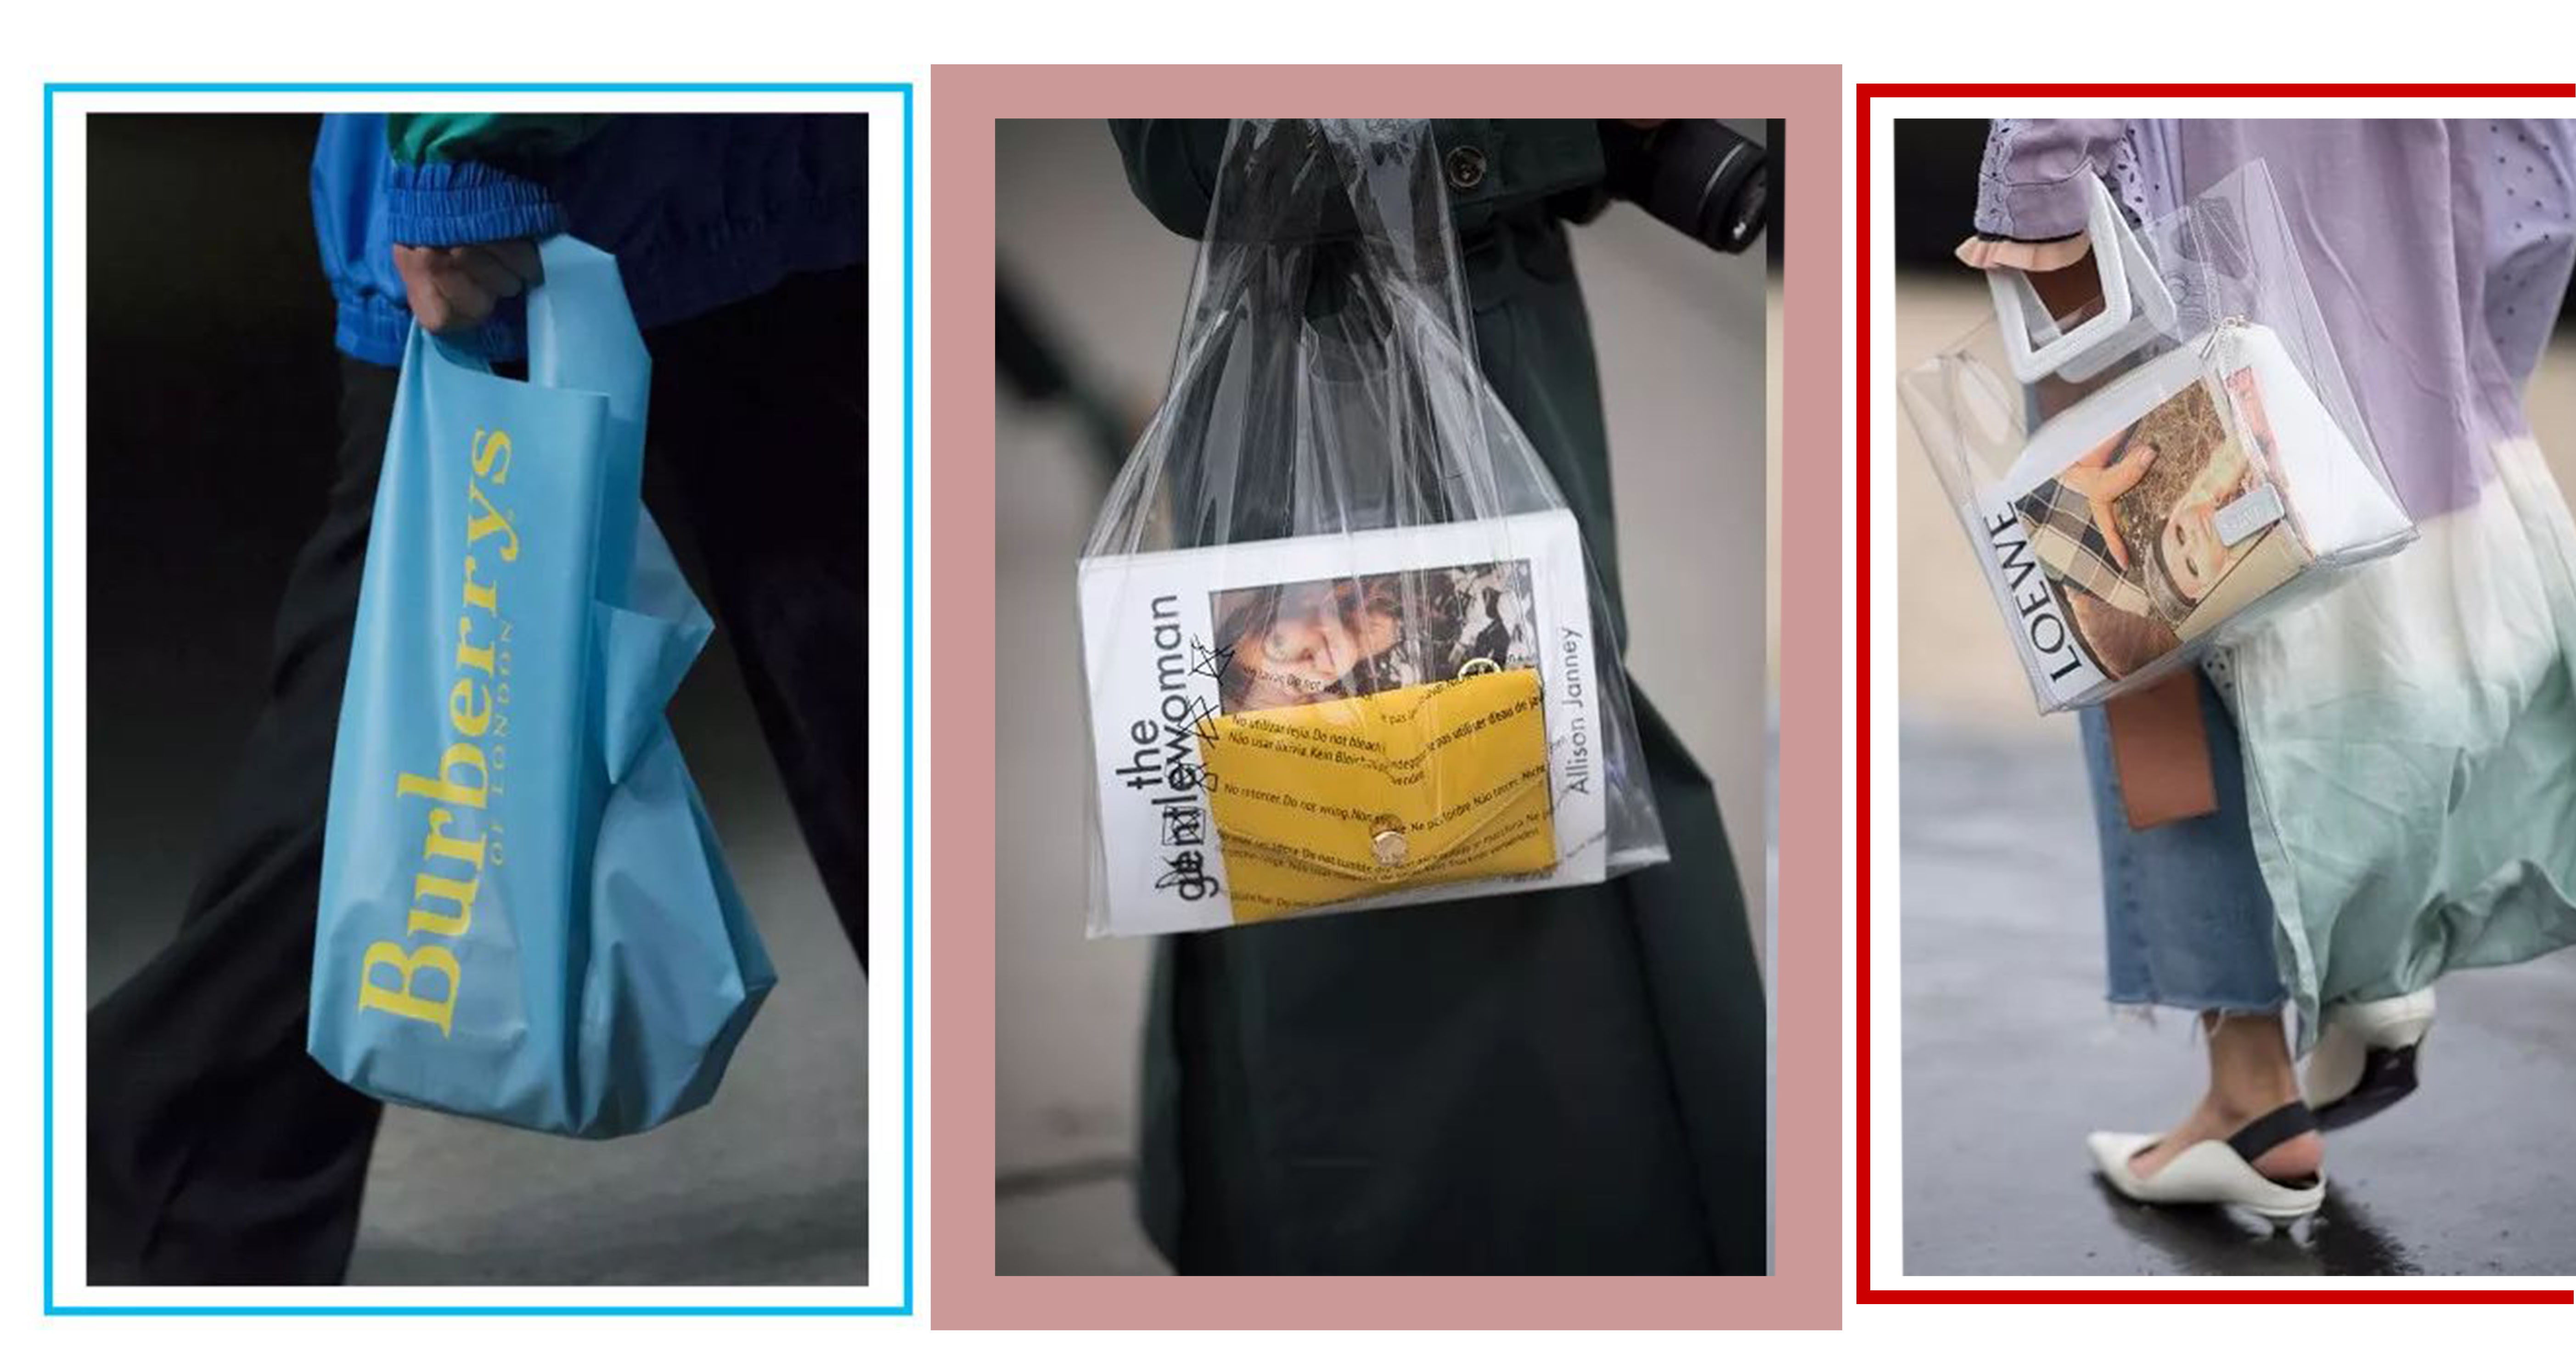 Next IT Bag: Your Daily Plastic Shopper - FASHION Humber